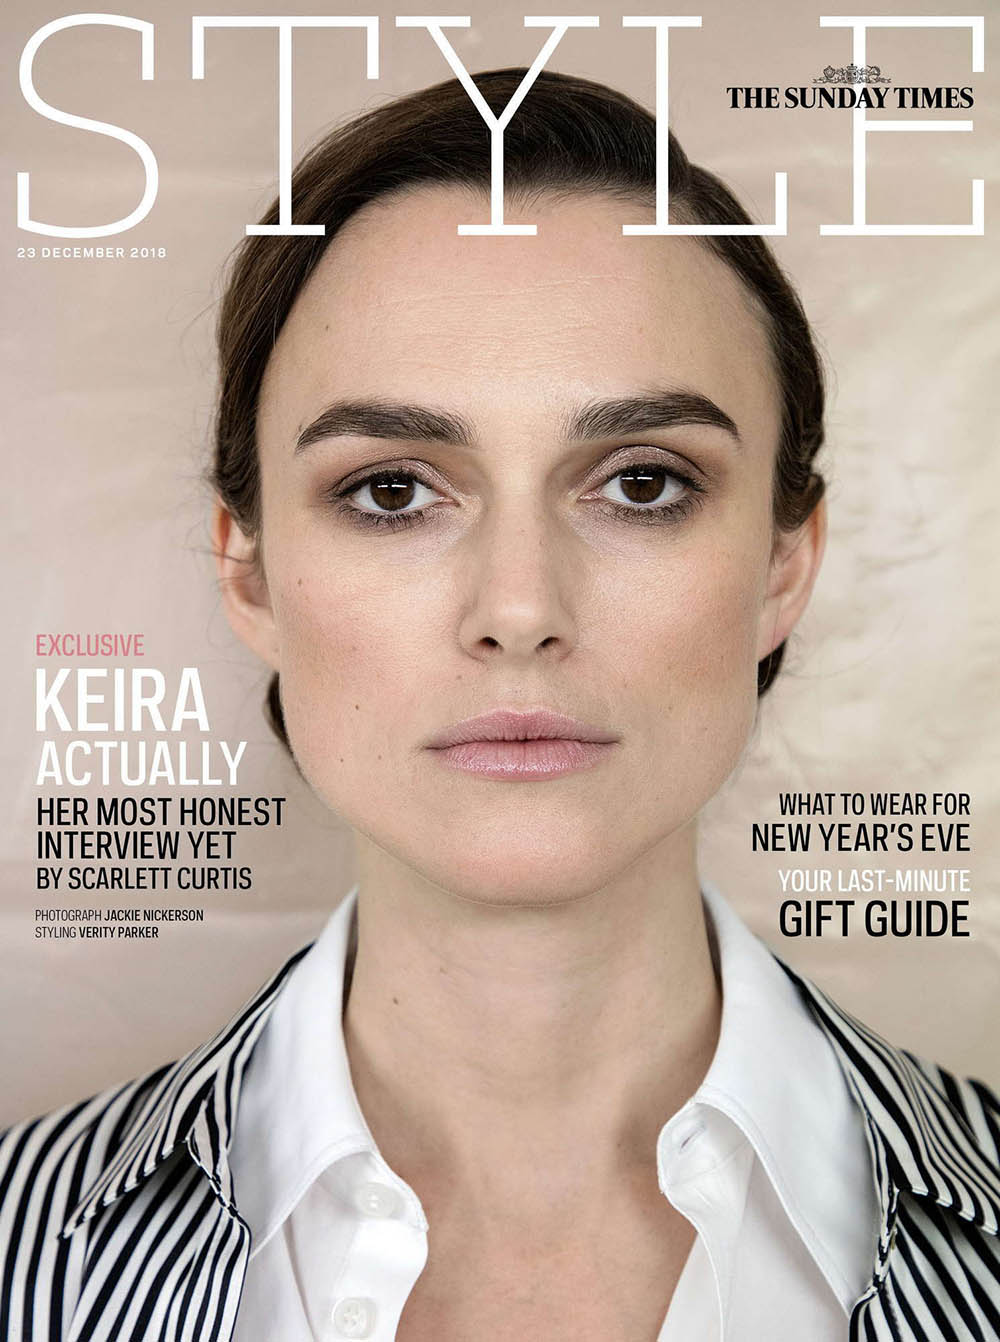 Keira-Knightley-covers-The-Sunday-Times-Style-December-23rd-2018-by-Jackie-Nickerson-1